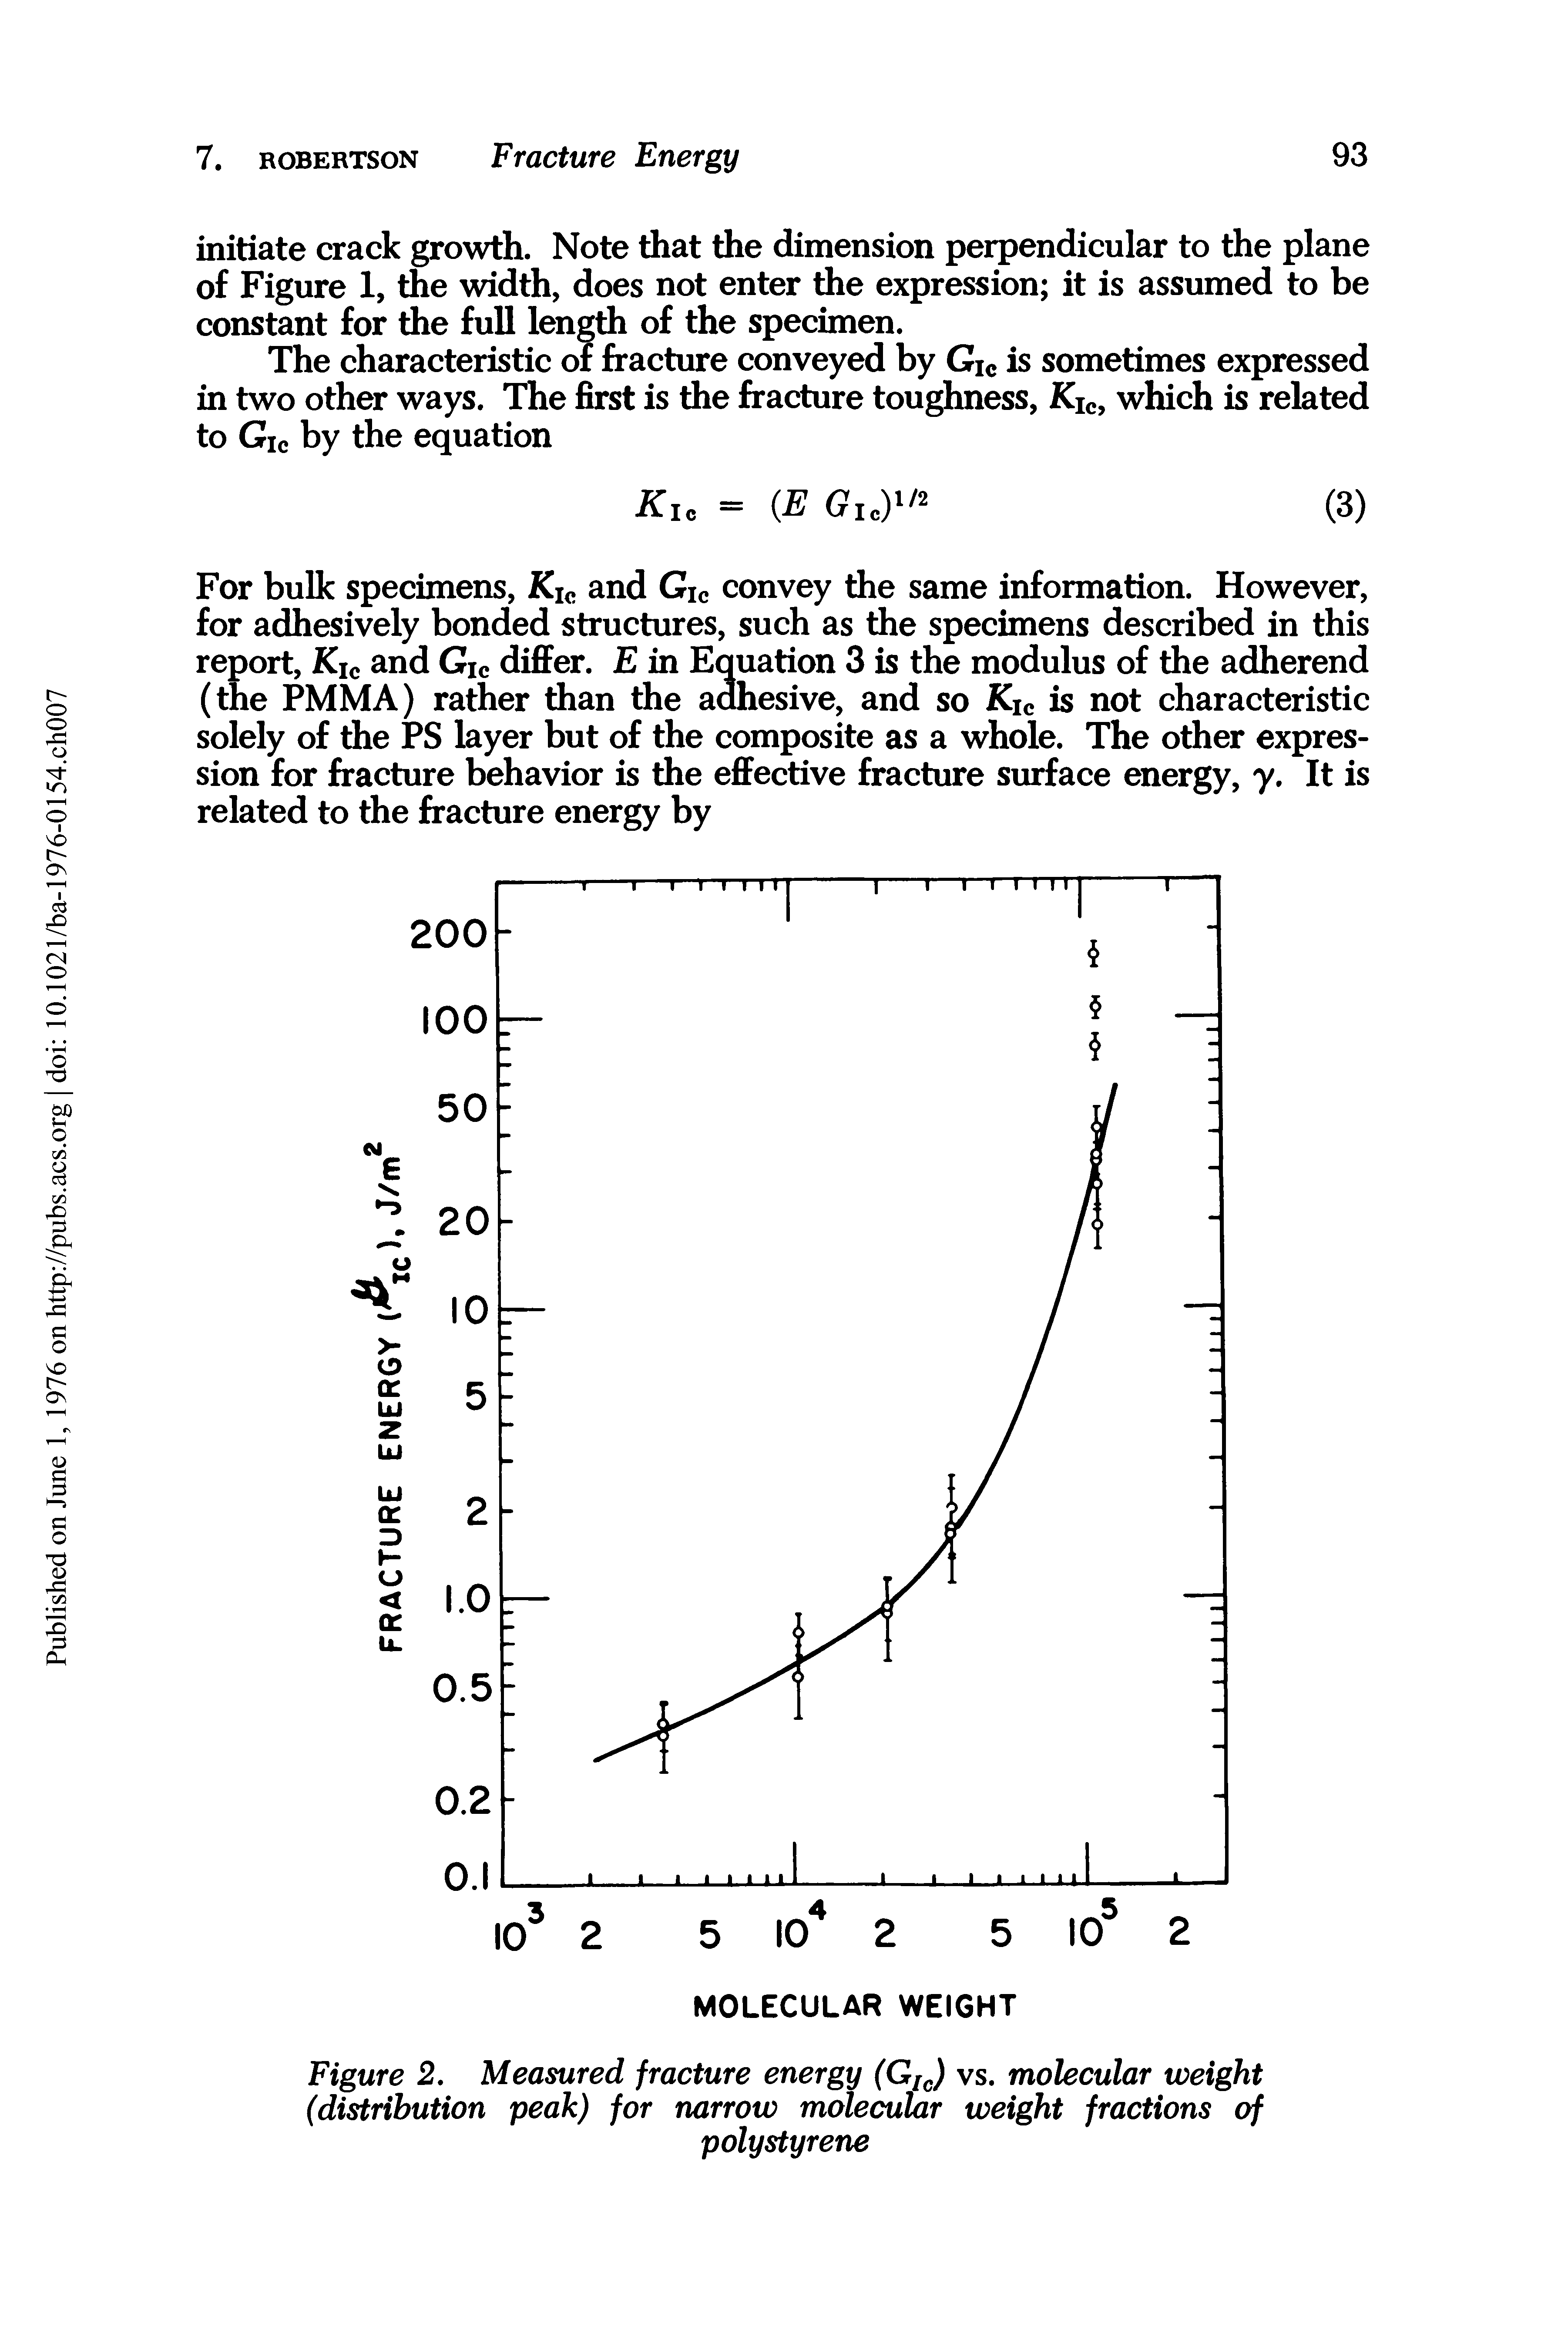 Figure 2. Measured fracture energy (Glc) vs. molecular weight (distribution peak) for narrow molecular weight fractions of...